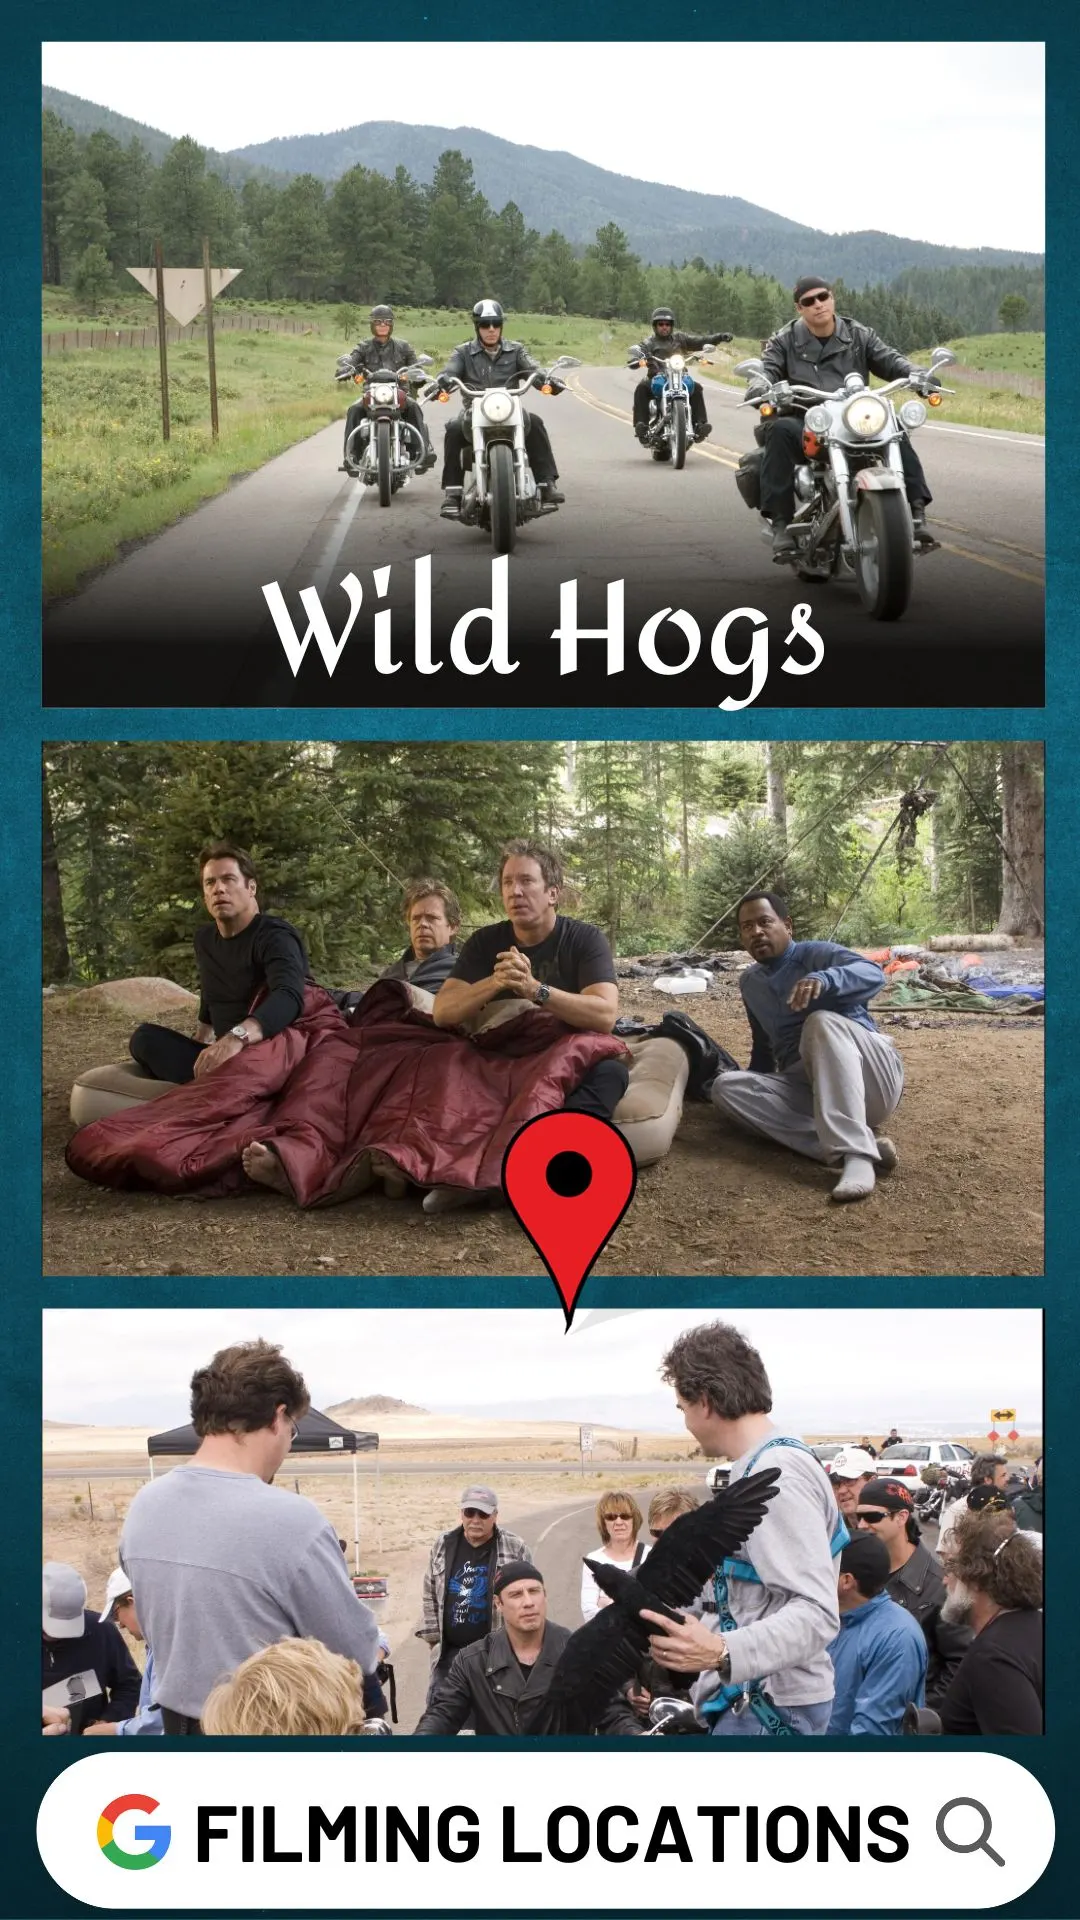 Wild Hogs Filming Locations